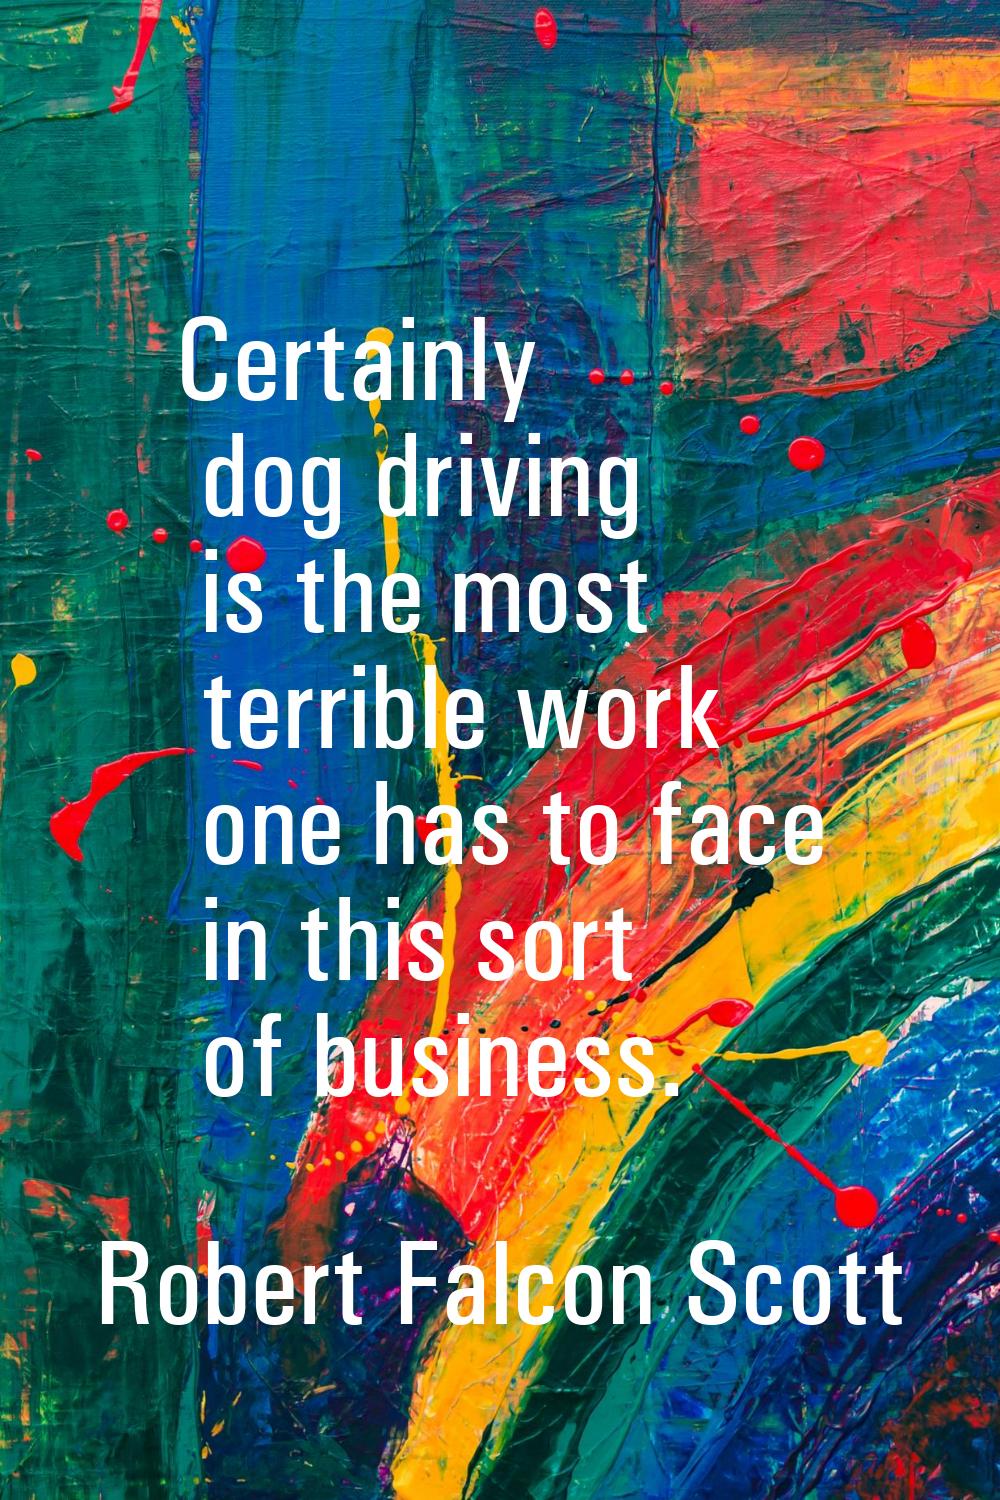 Certainly dog driving is the most terrible work one has to face in this sort of business.